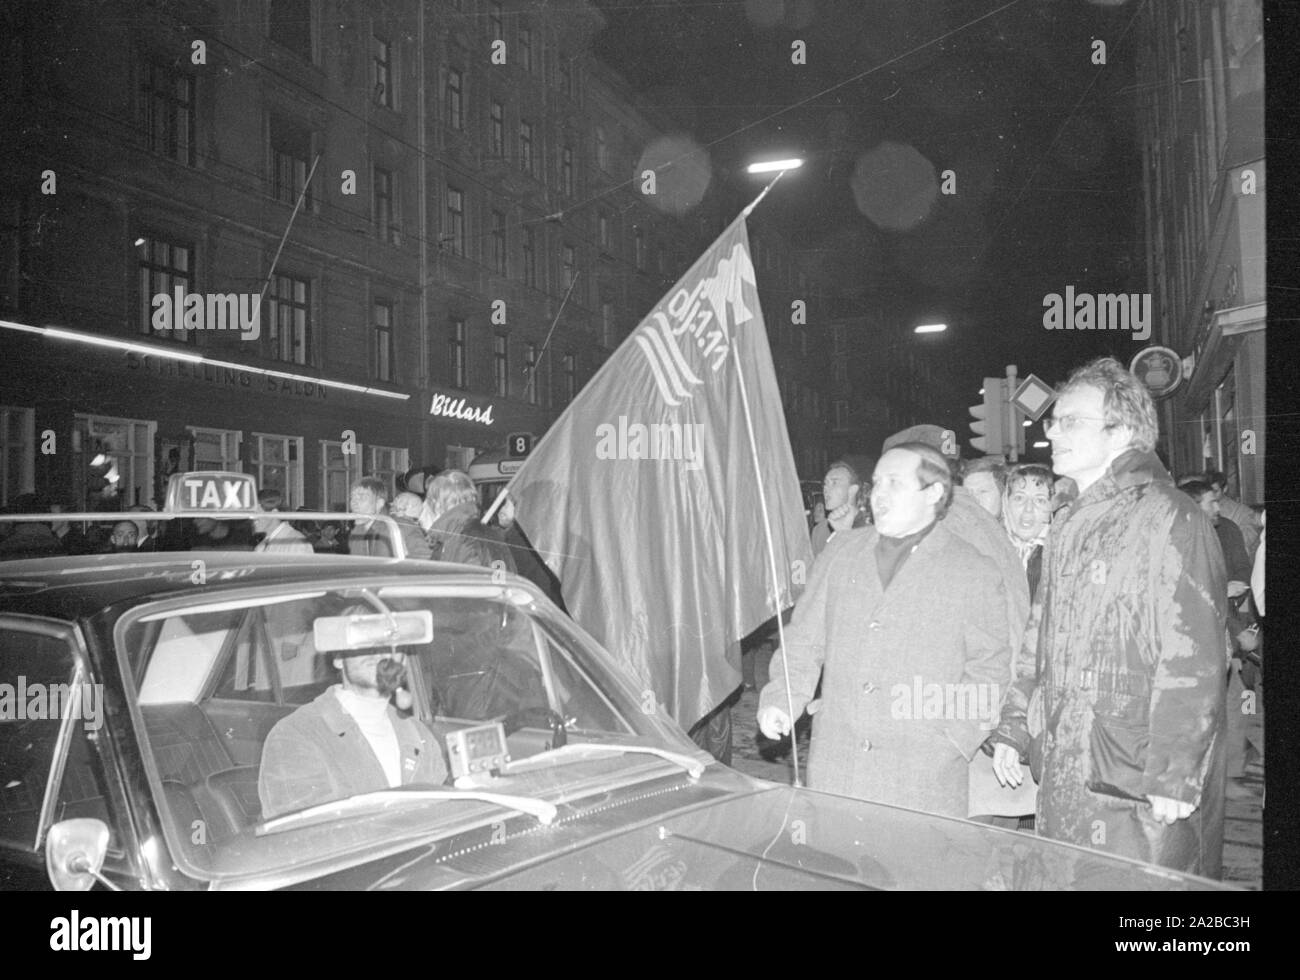 After the assassination attempt on Rudi Dutschke, actions took place against the Springer publishing house throughout Germany on the Easter weekend 1968. In Munich, demonstrators try to stop the delivery of the Bild-Zeitung through the barricade of the Munich bookshop on Schellingstrasse (either 12.04 or 15.04.). Pictured: Demonstrators of the 'Deutsche Jungenschaft vom 1.11.1929' Stock Photo